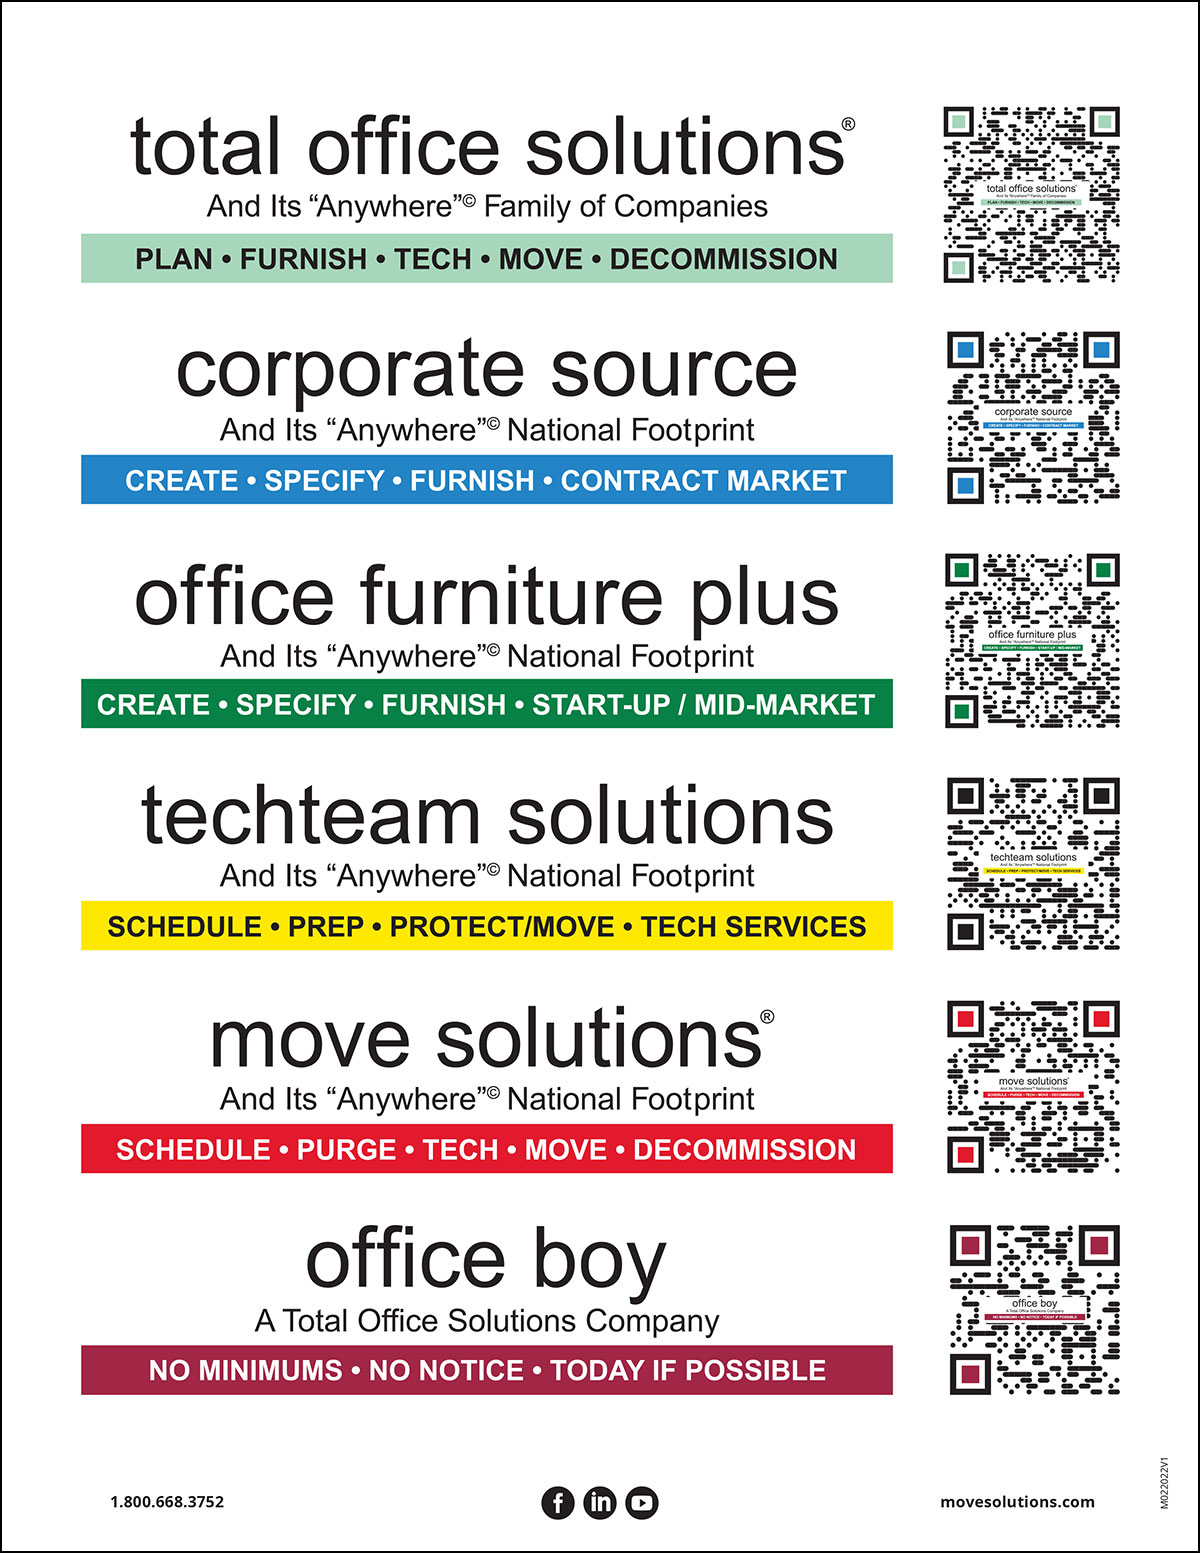 Move Solutions Service Footprint - Move Solutions